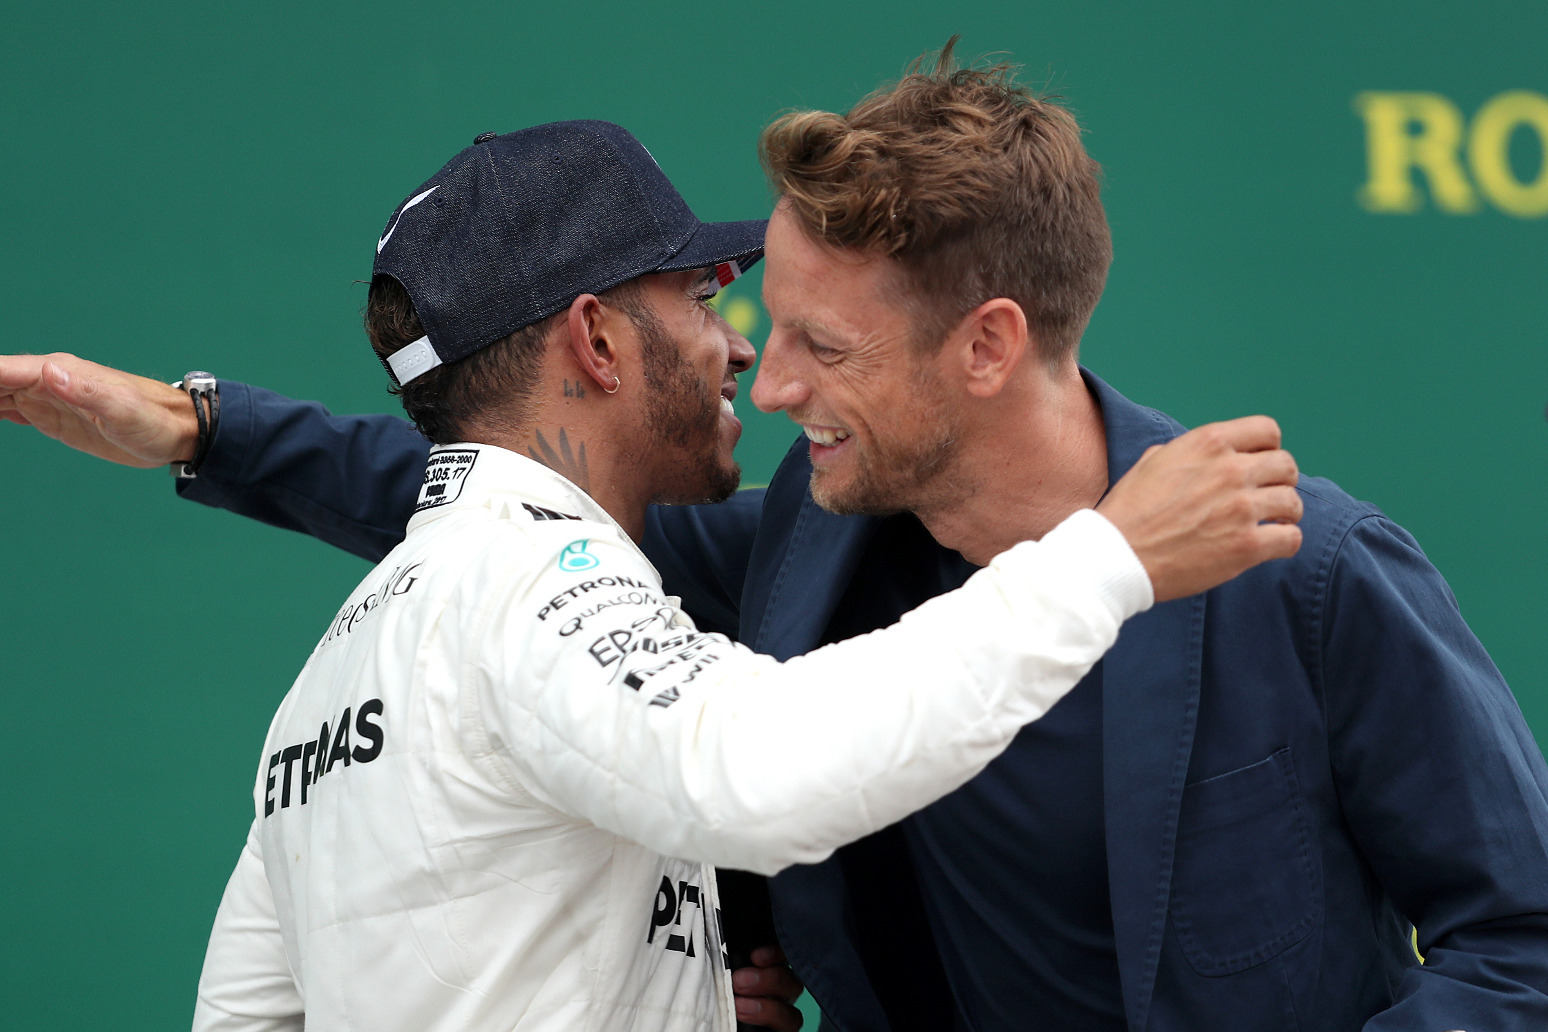 Jenson Button backs Lewis Hamilton to compete for record-breaking eighth title 